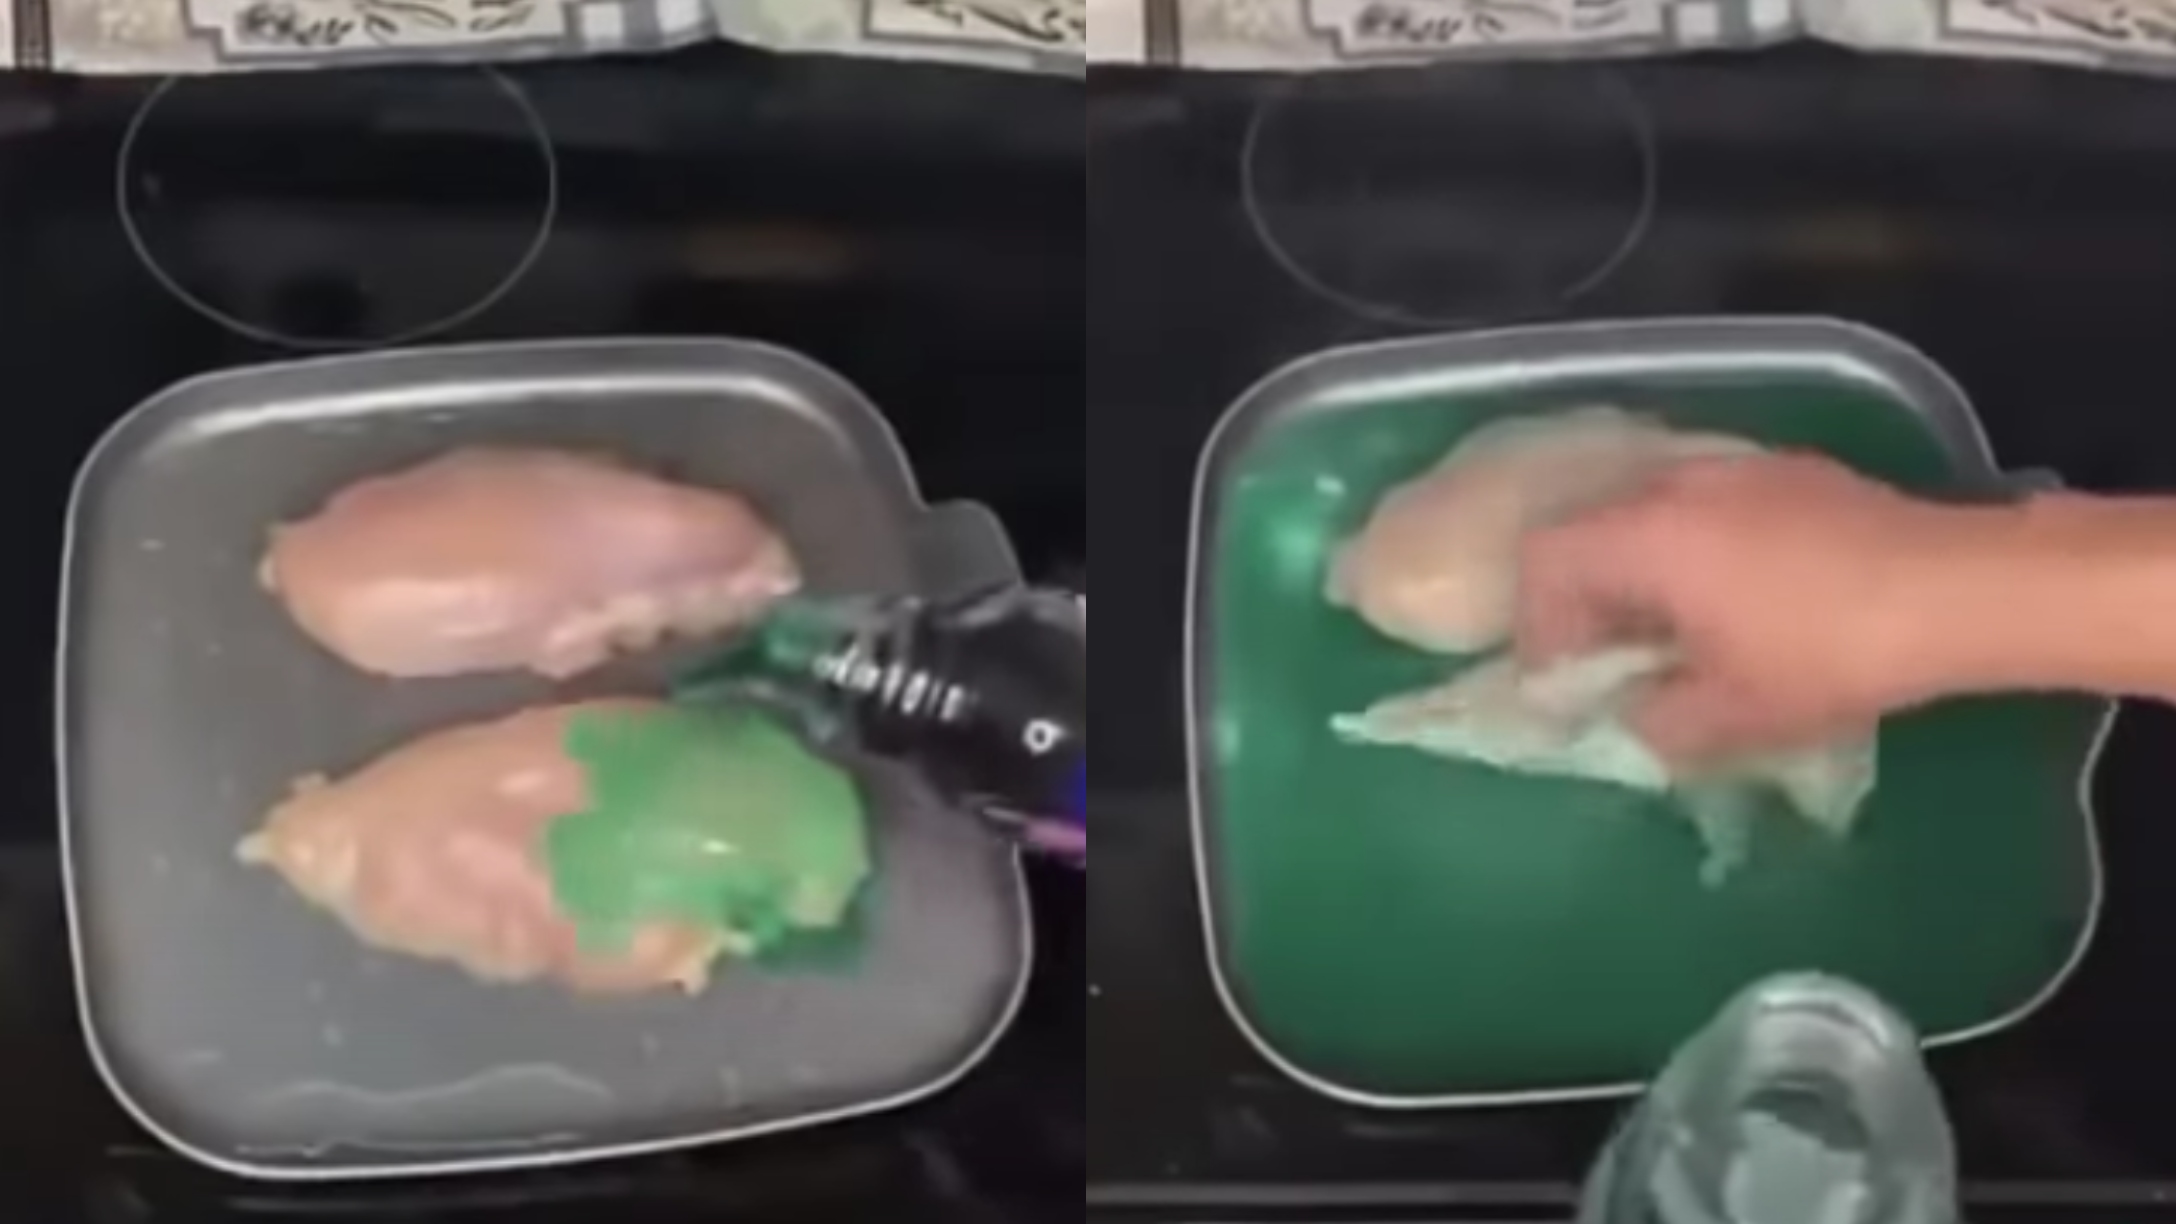 Bizarre TikTok Trend Has People Making 'NyQuil Chicken' & It's Just as Gross as It Sounds